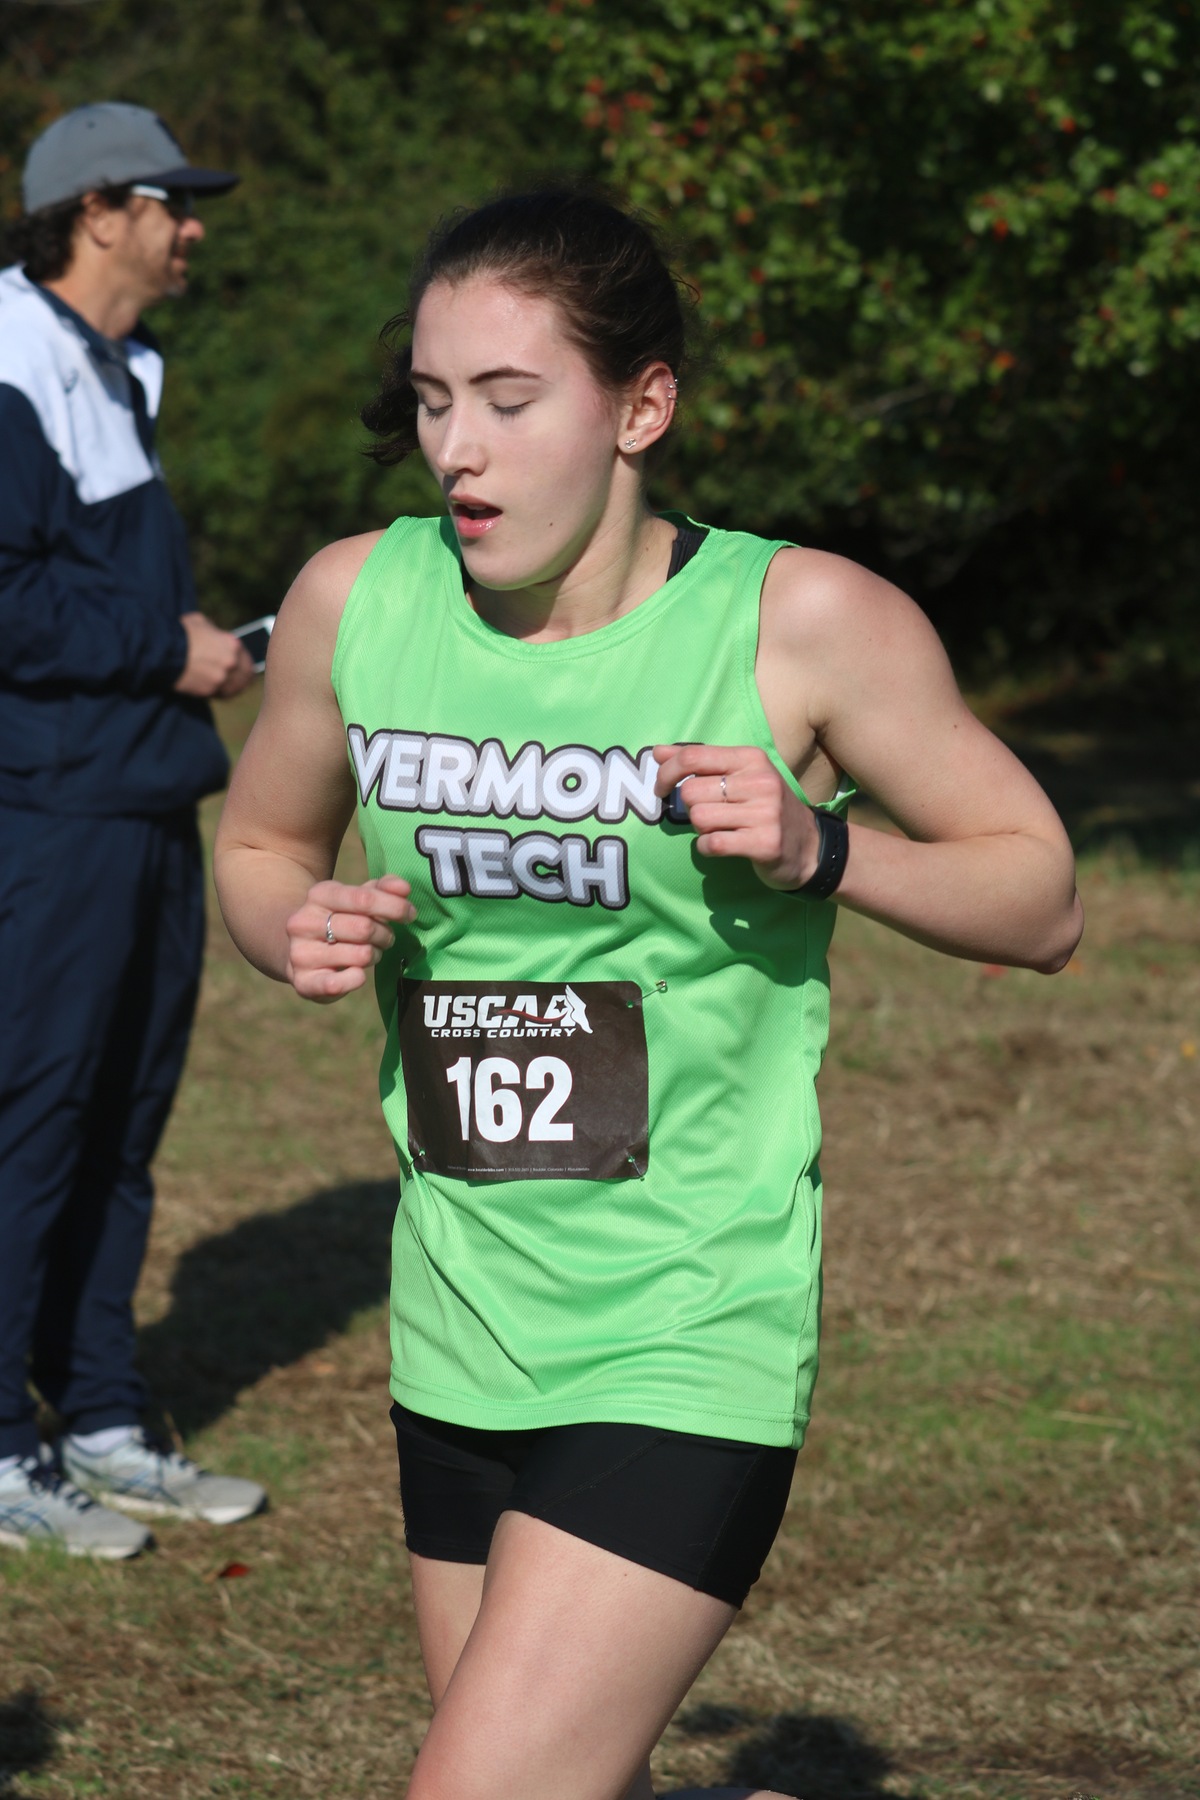 Vermont Tech runners shine at USCAA National Championships